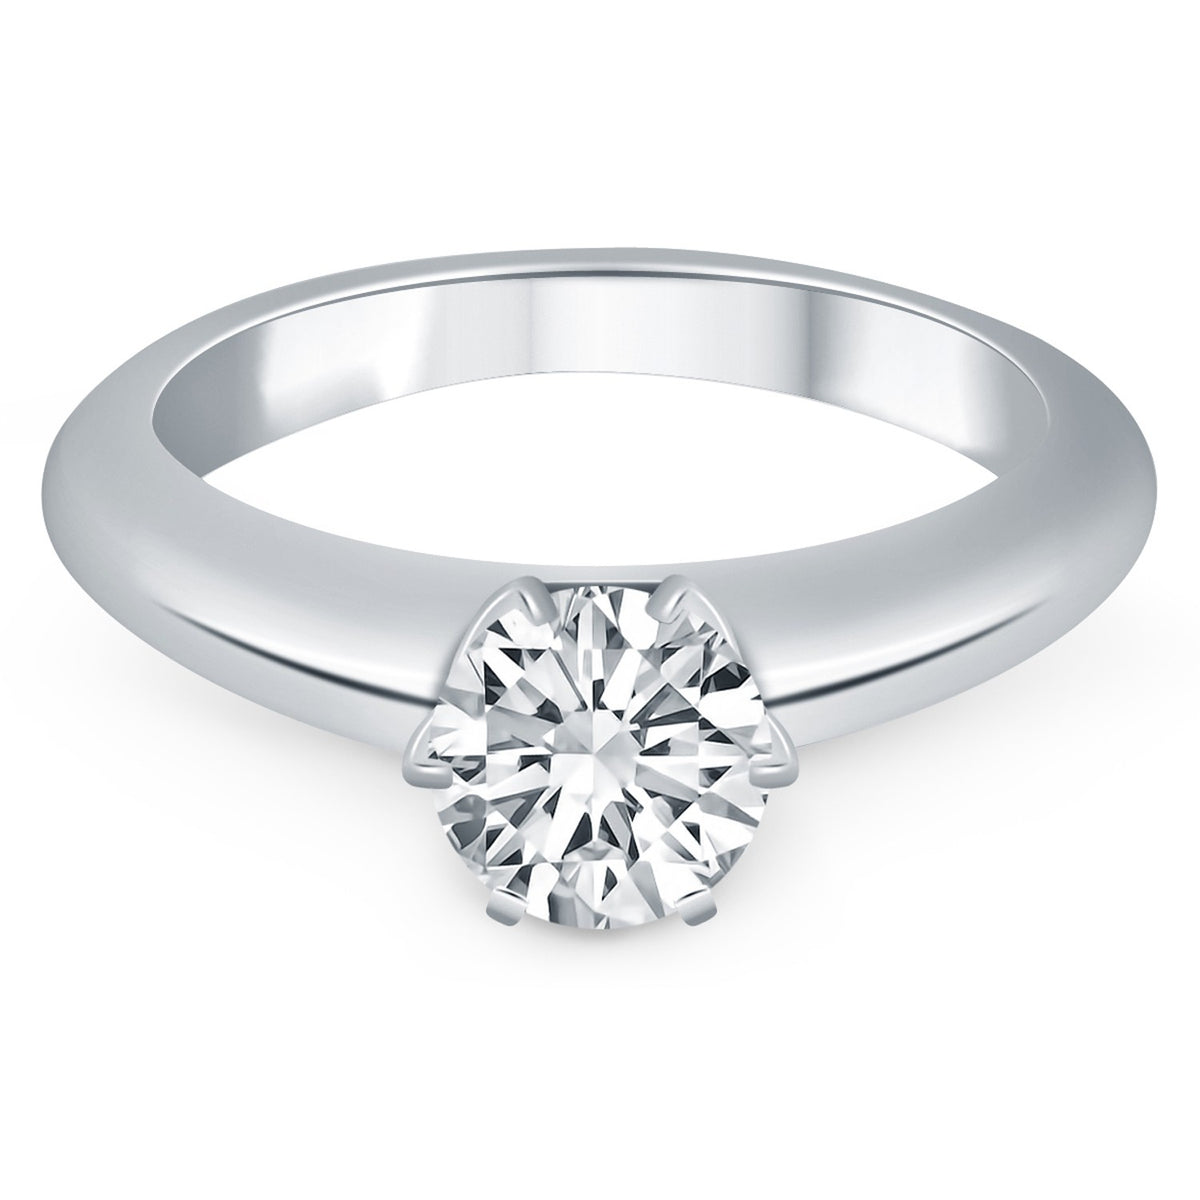 Solitaire Cathedral Engagement Ring - 14k White Gold